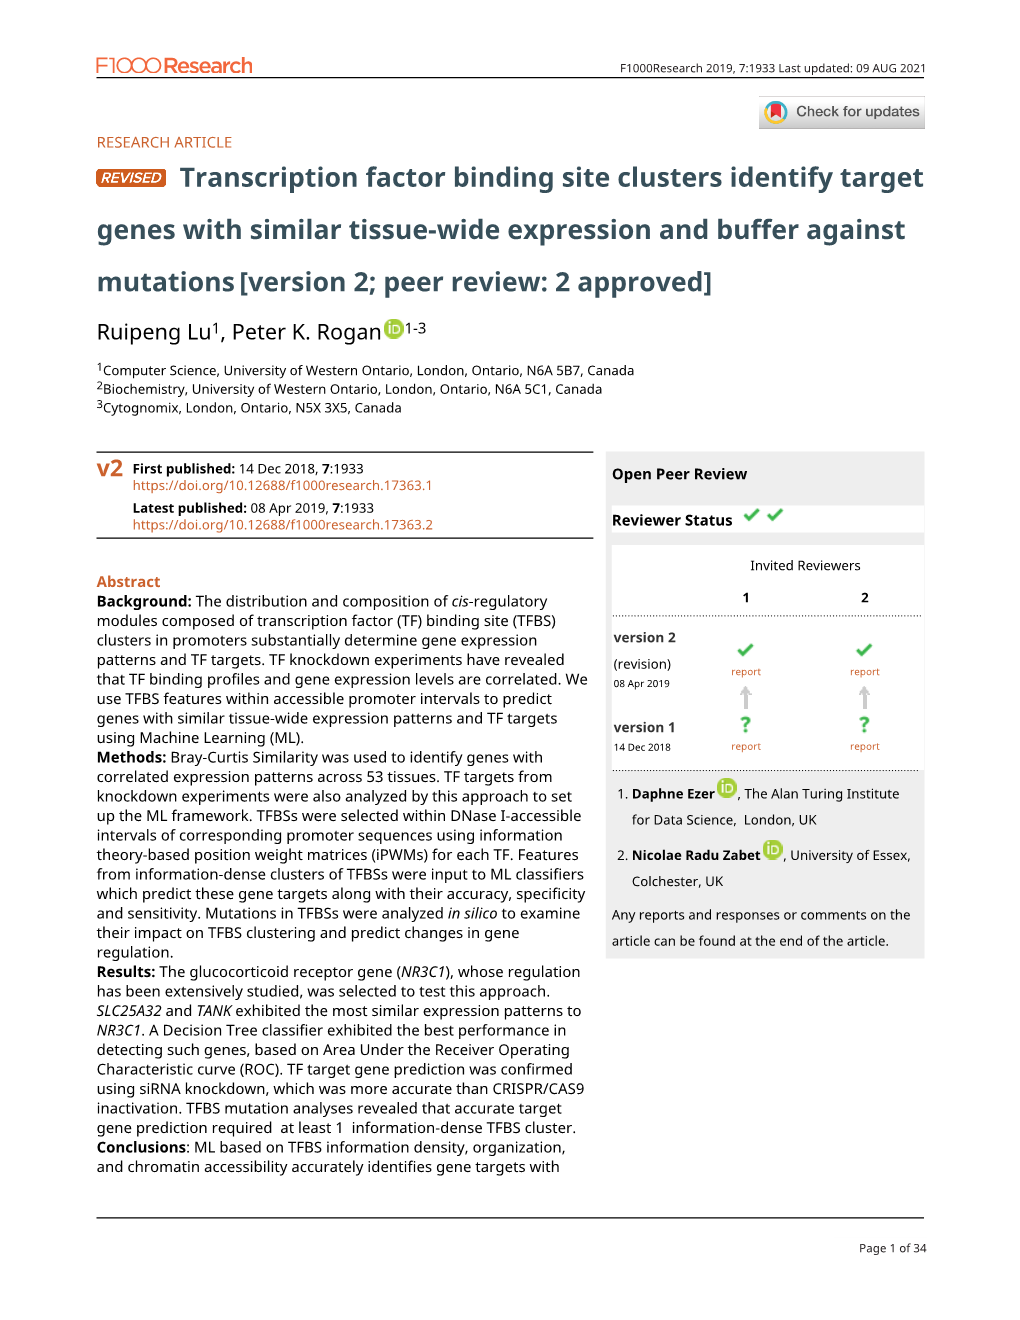 Transcription Factor Binding Site Clusters Identify Target Genes with Similar Tissue-Wide Expression and Buffer Against Mutations [Version 2; Peer Review: 2 Approved]